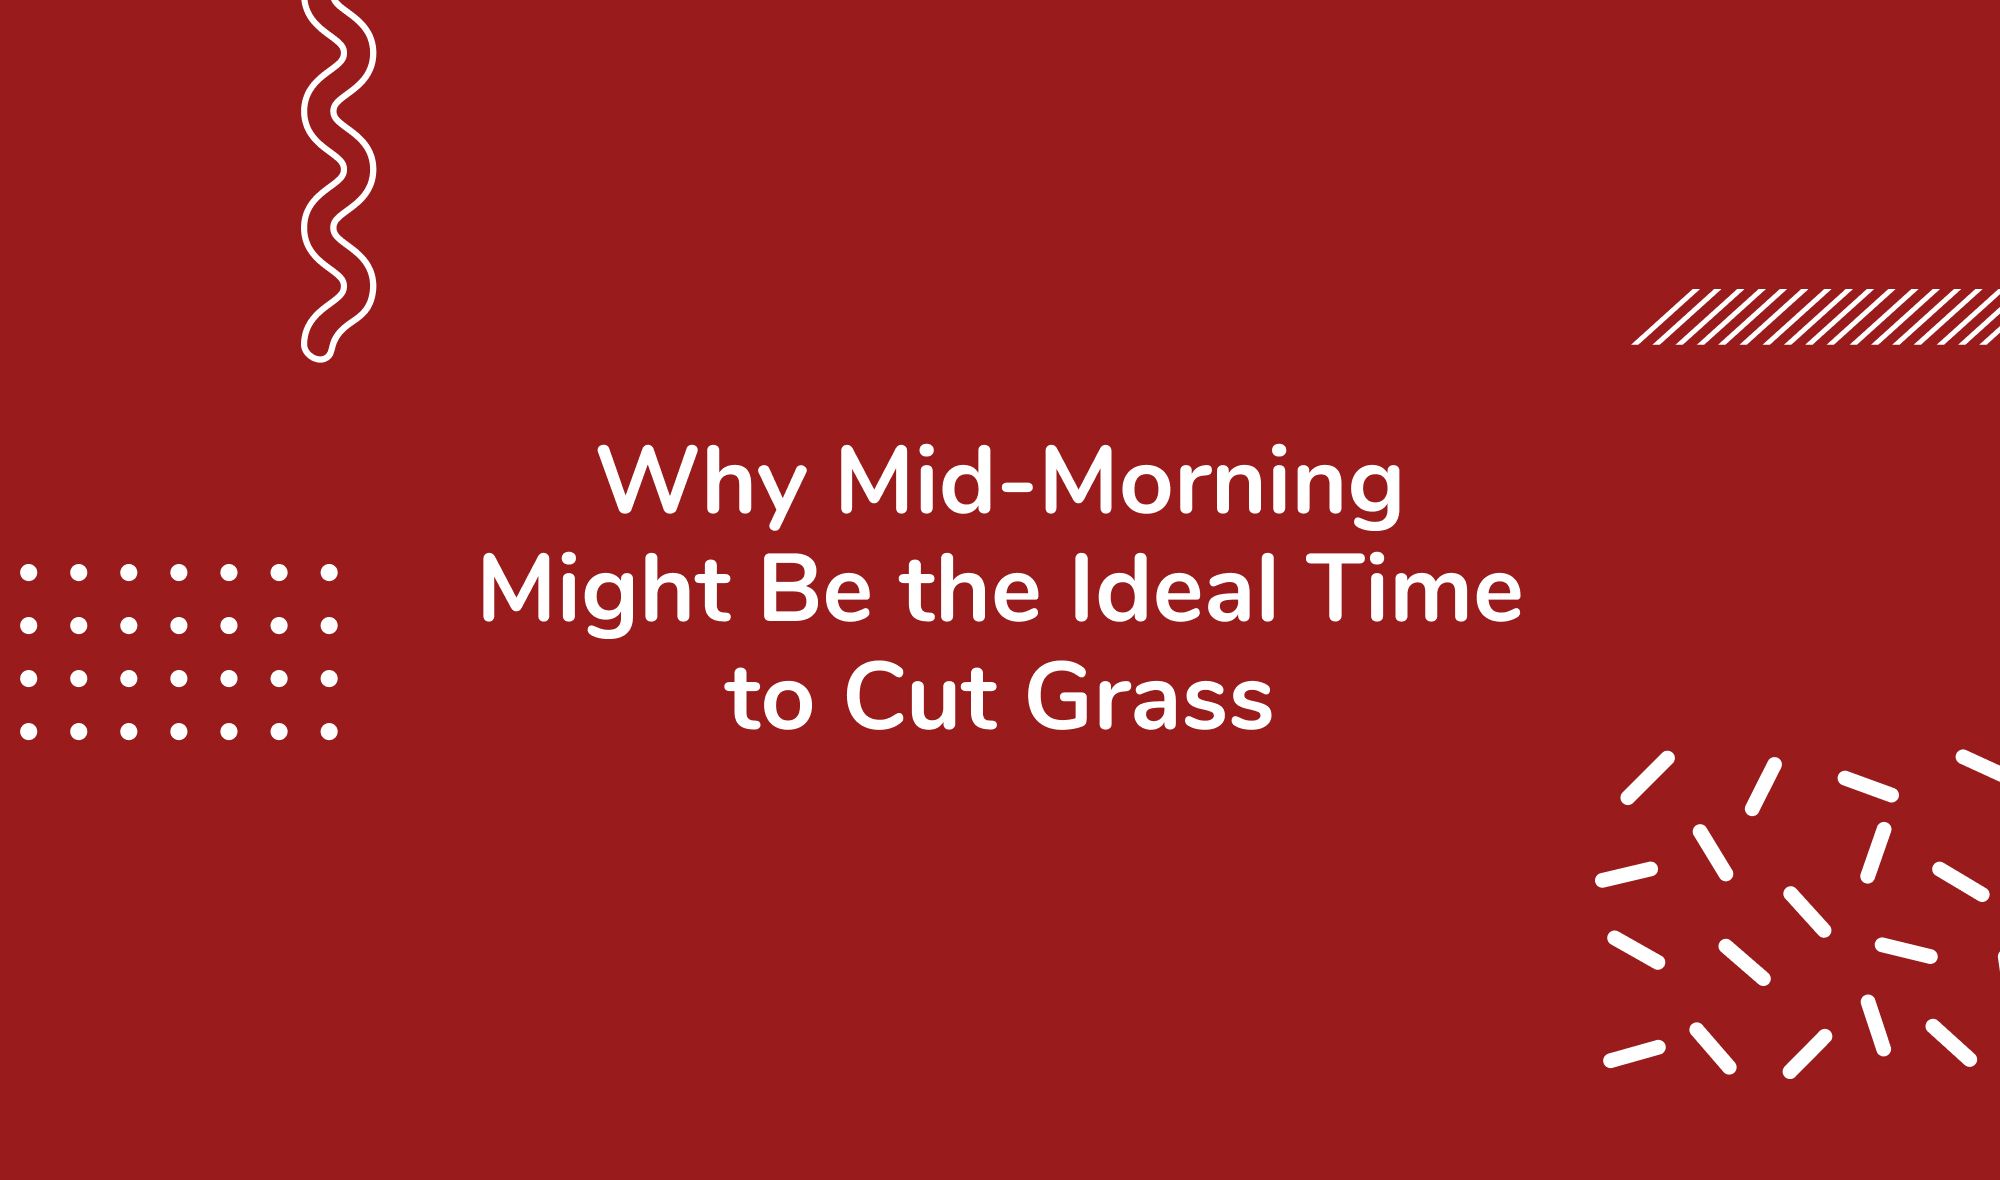 Why Mid-Morning Might Be the Ideal Time to Cut Grass